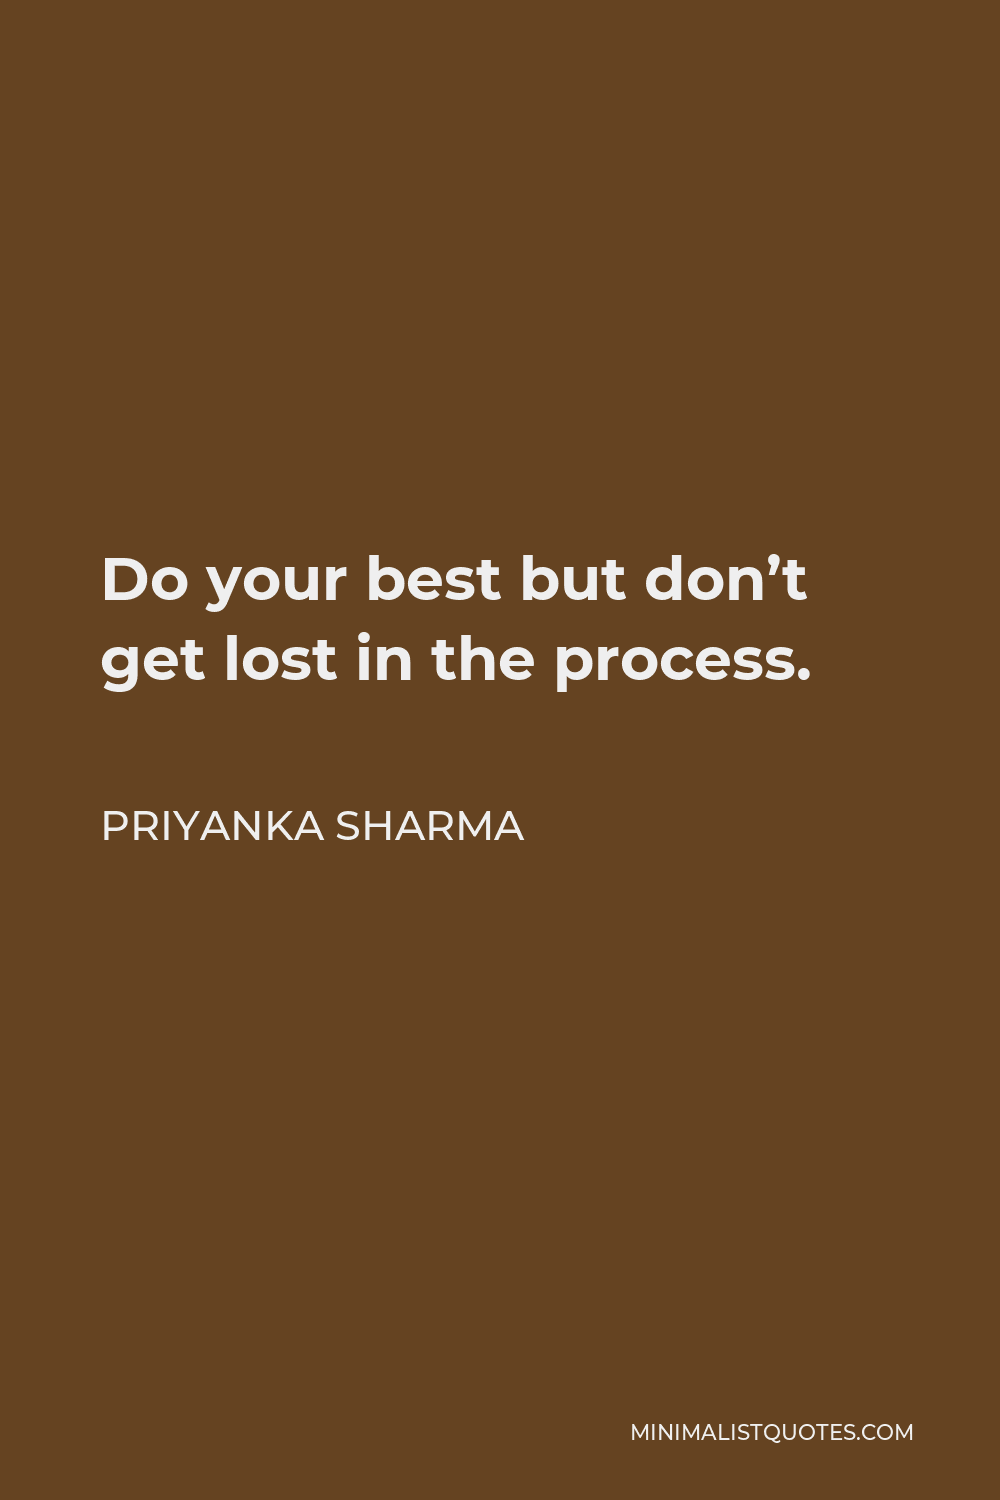 Priyanka Sharma Quote - Do your best but don’t get lost in the process.